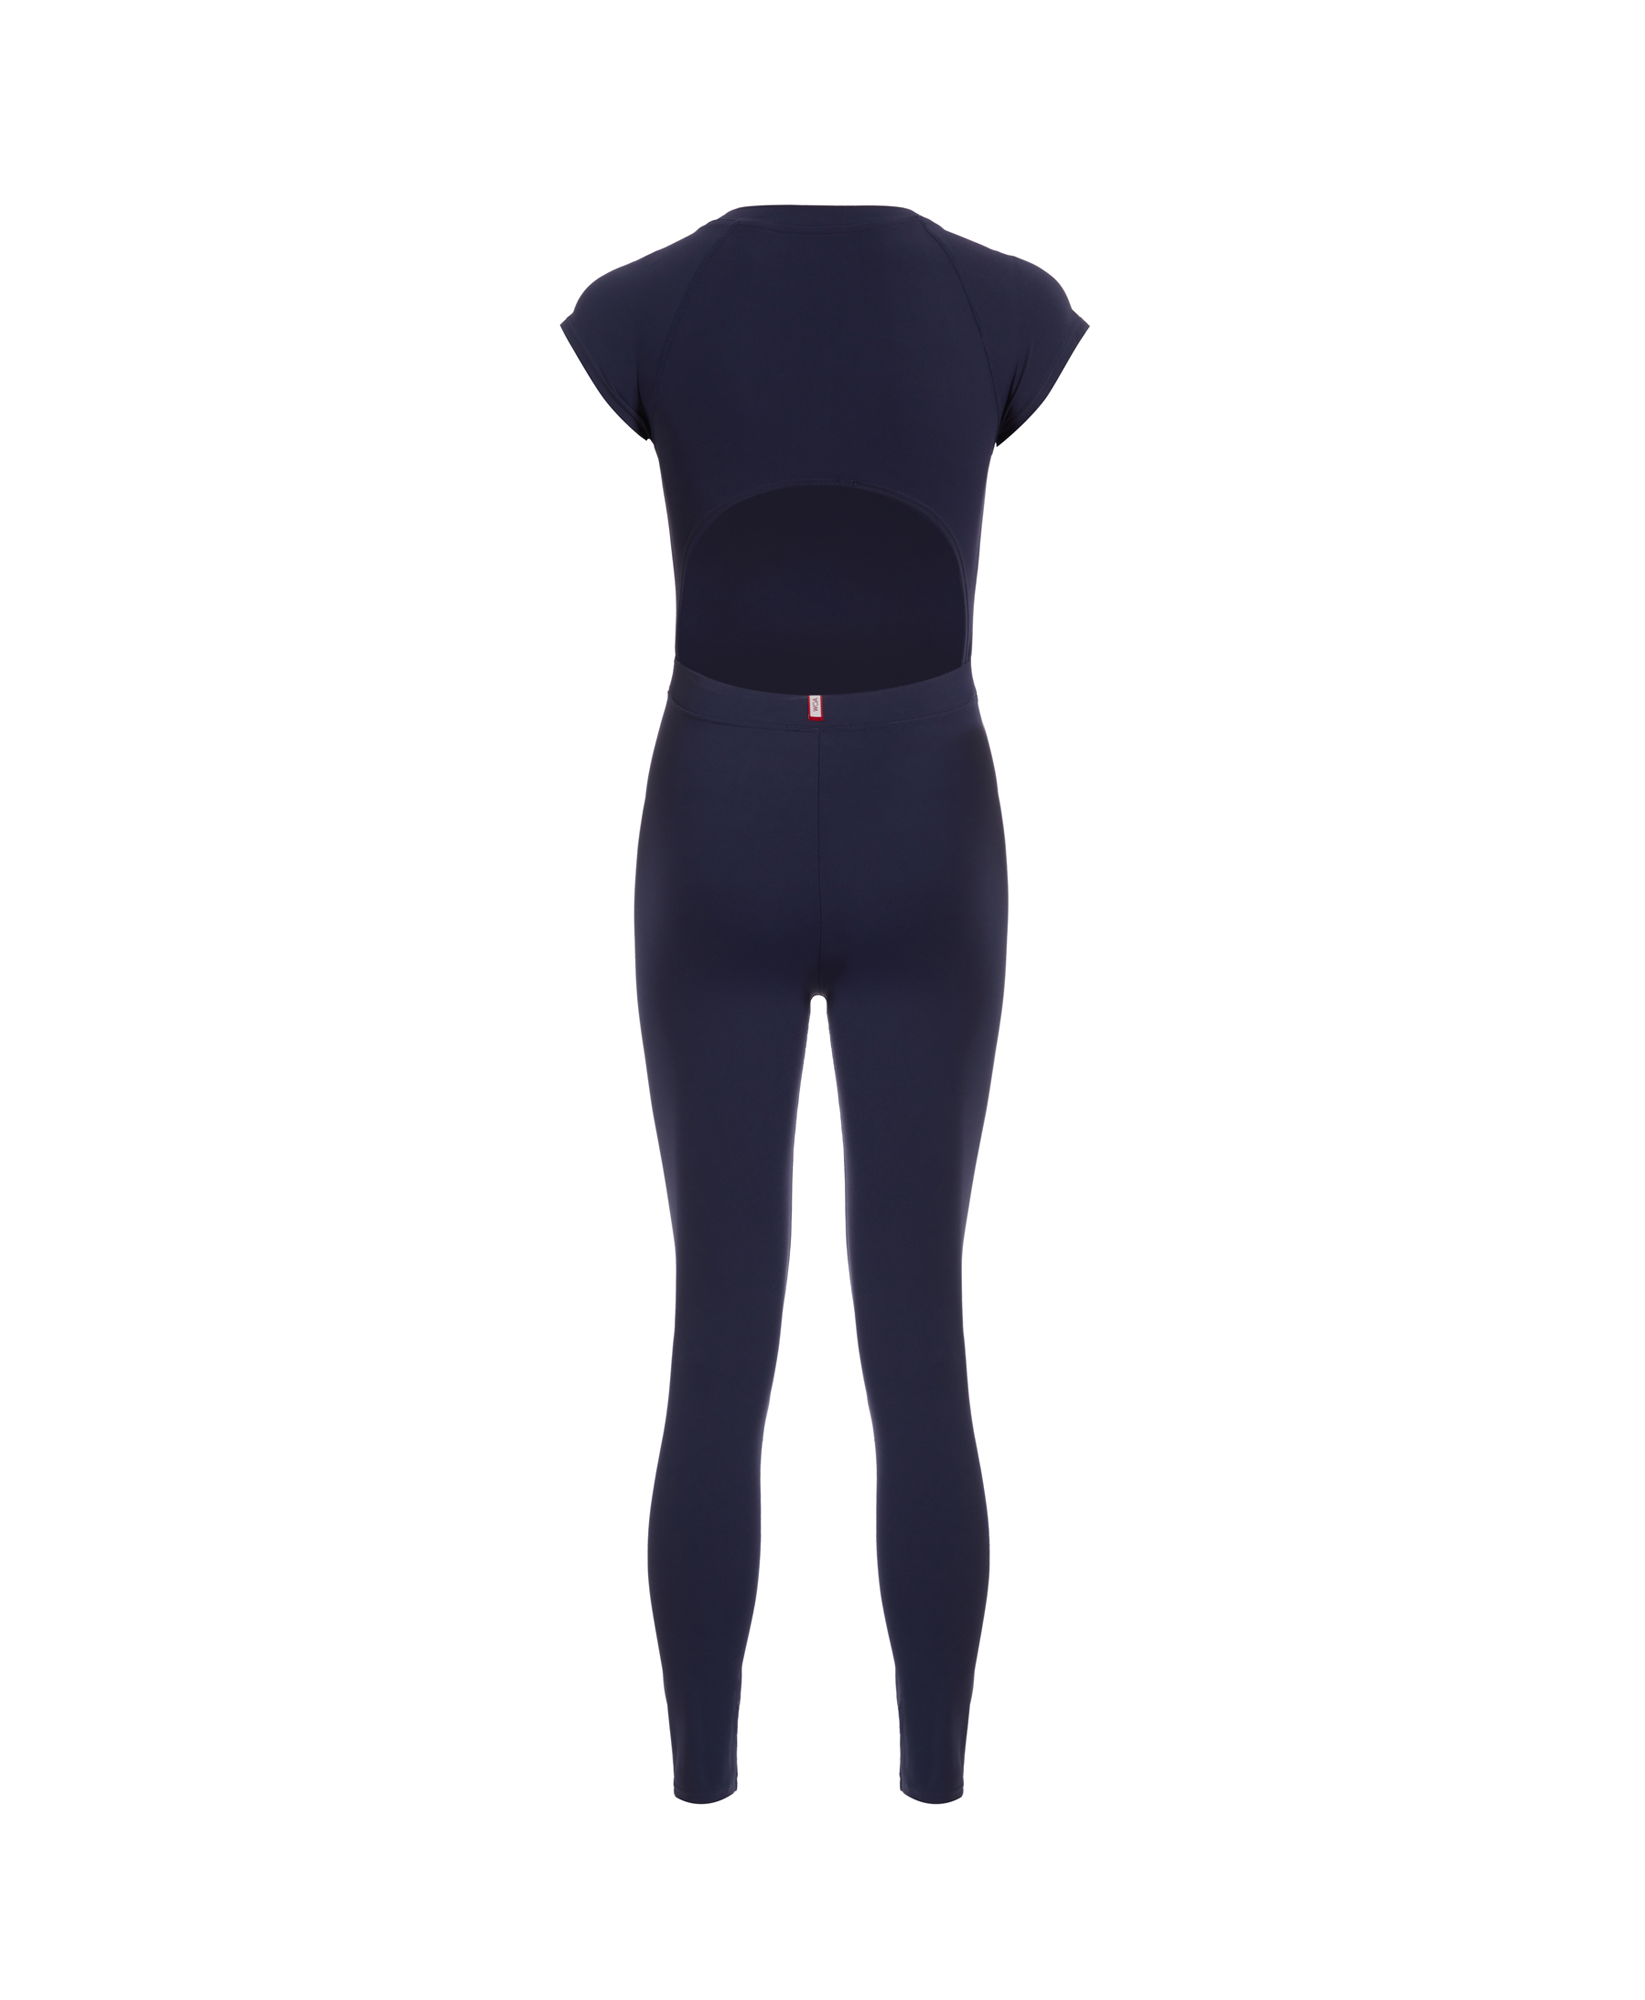 Wear One's At Varsity Unitard in Navy on ghost mannequin back view